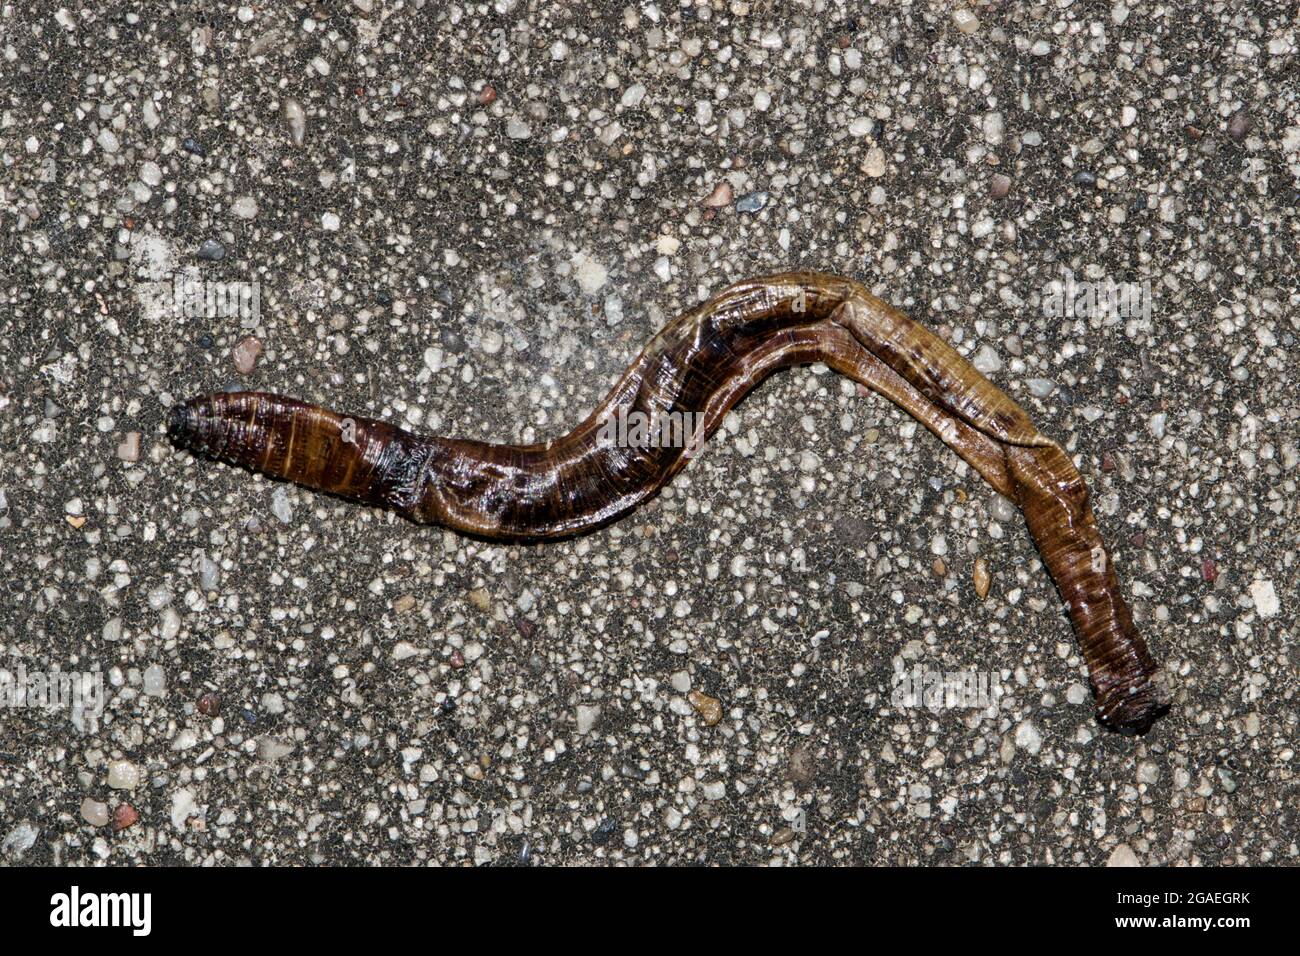 Dead earthworm dried up on the pavement after a heavy rainfall. This occurs after coming to the surface to avoid drowning and become disoriented. Stock Photo